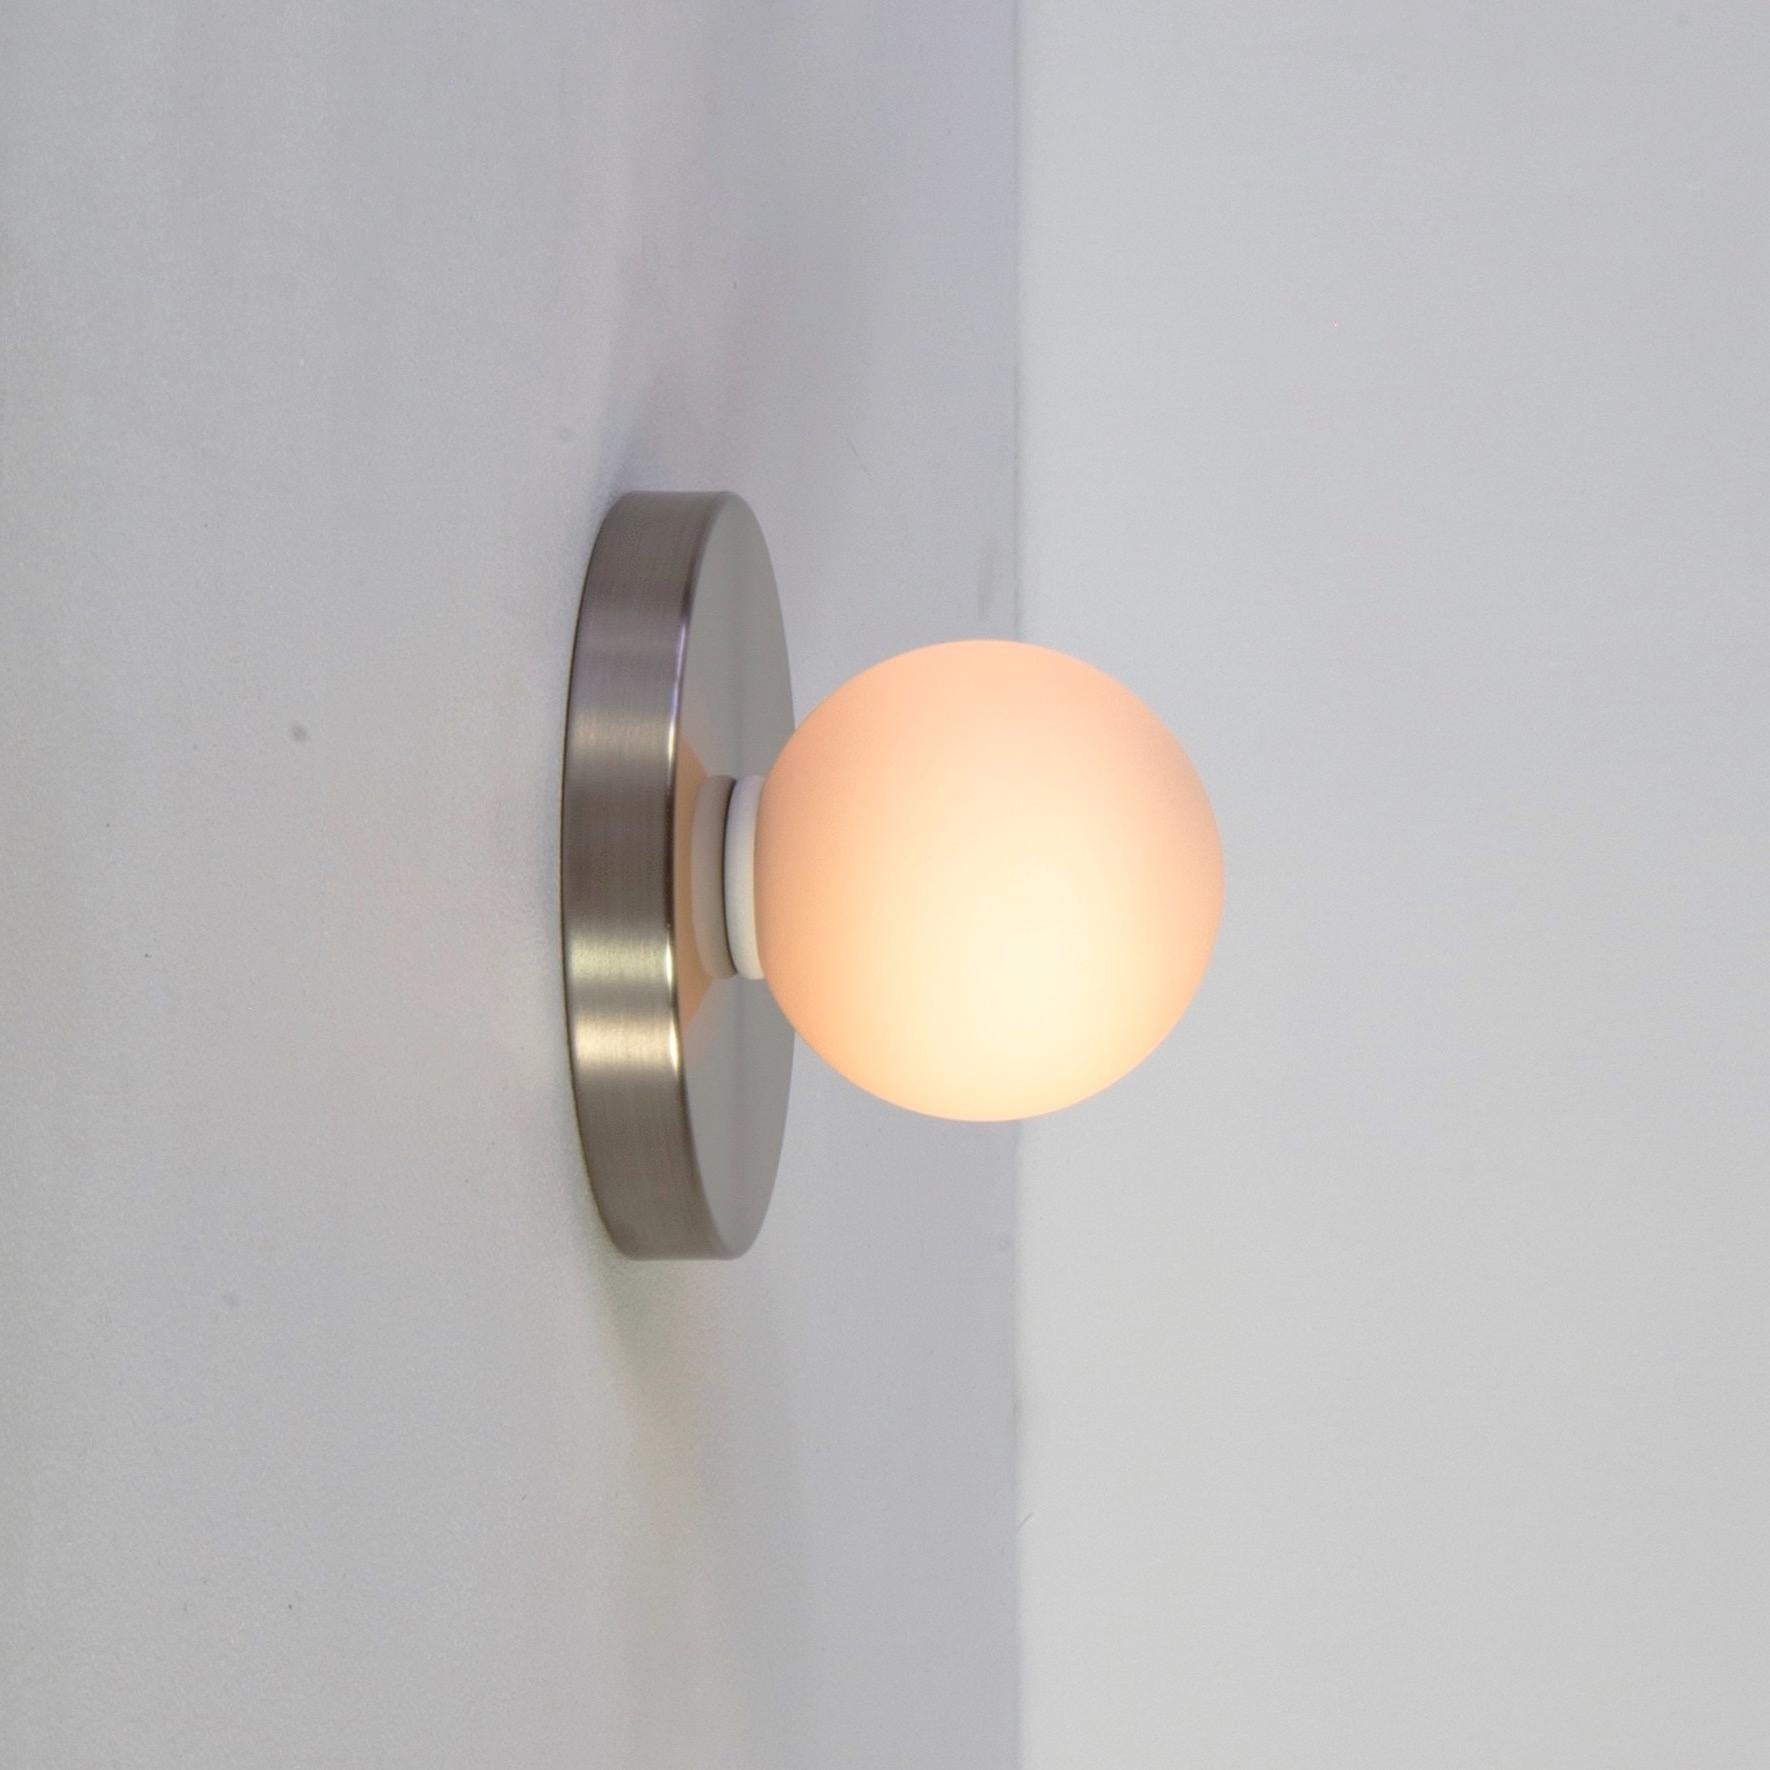 Modern Set of 4 Globe Sconces by Research.Lighting, Brushed Nickel, Made to Order For Sale